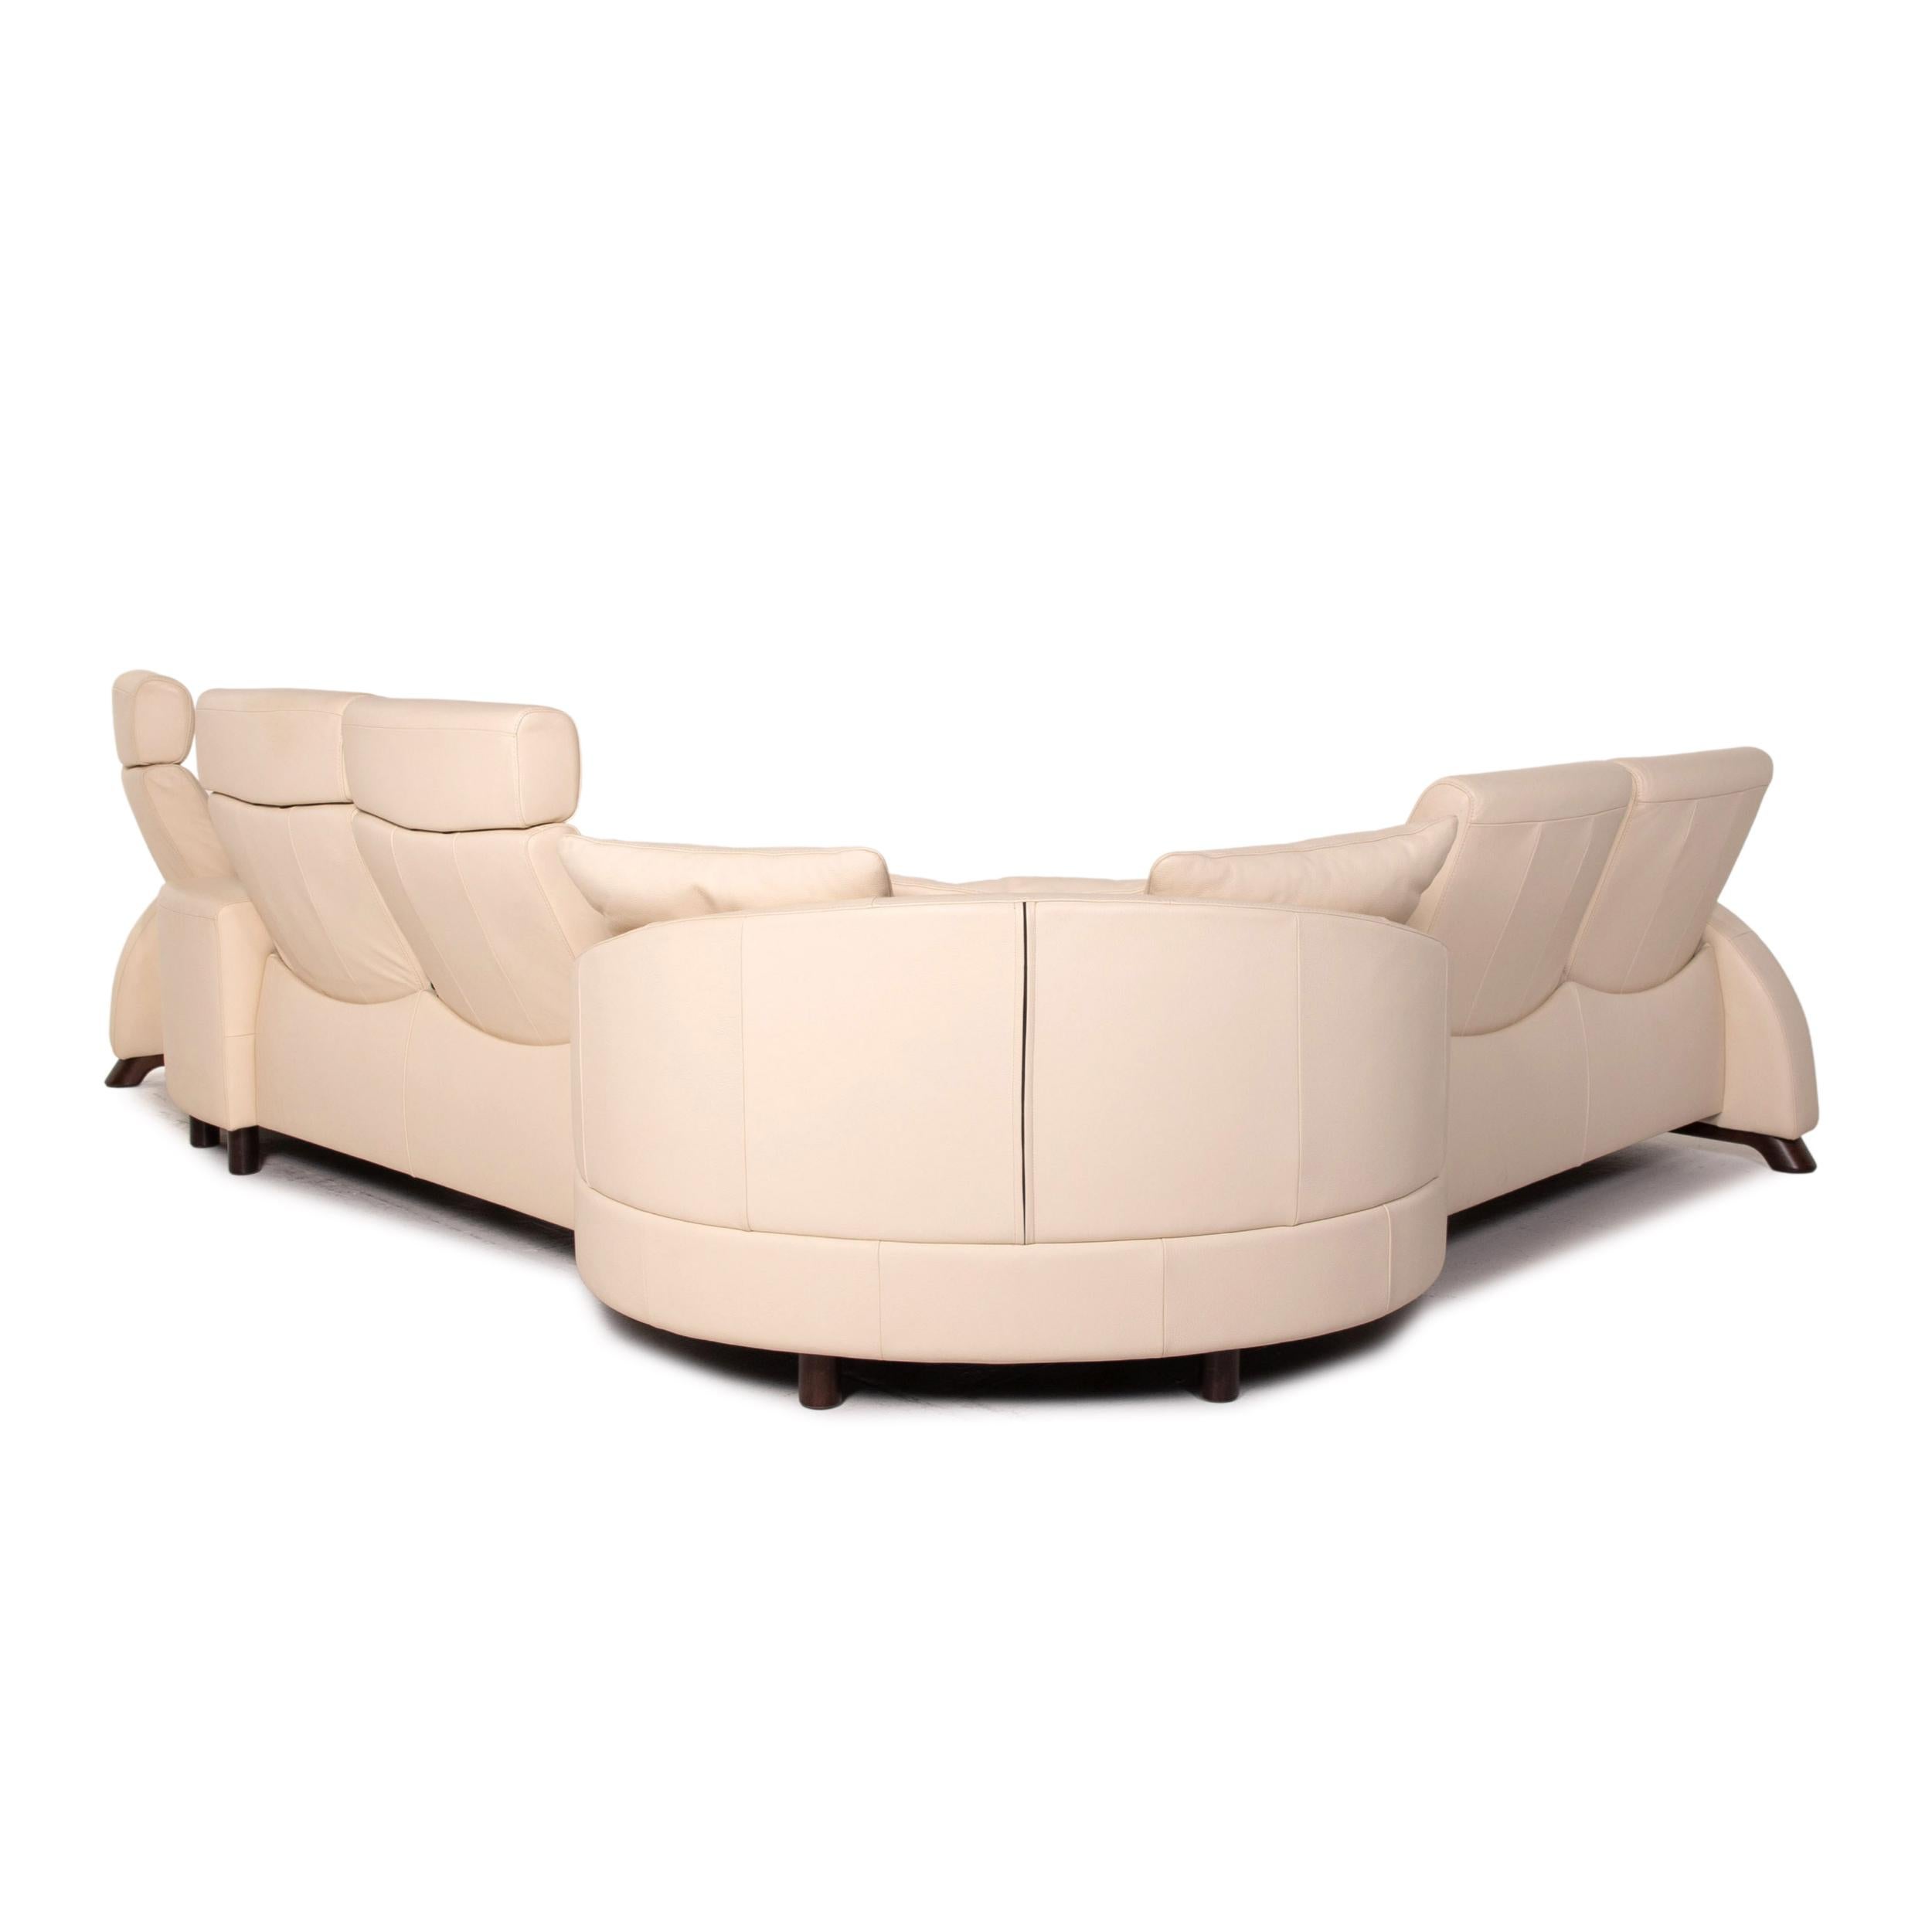 Stressless Arion Leather Corner Sofa Cream Relax Function Sofa Couch For Sale 5